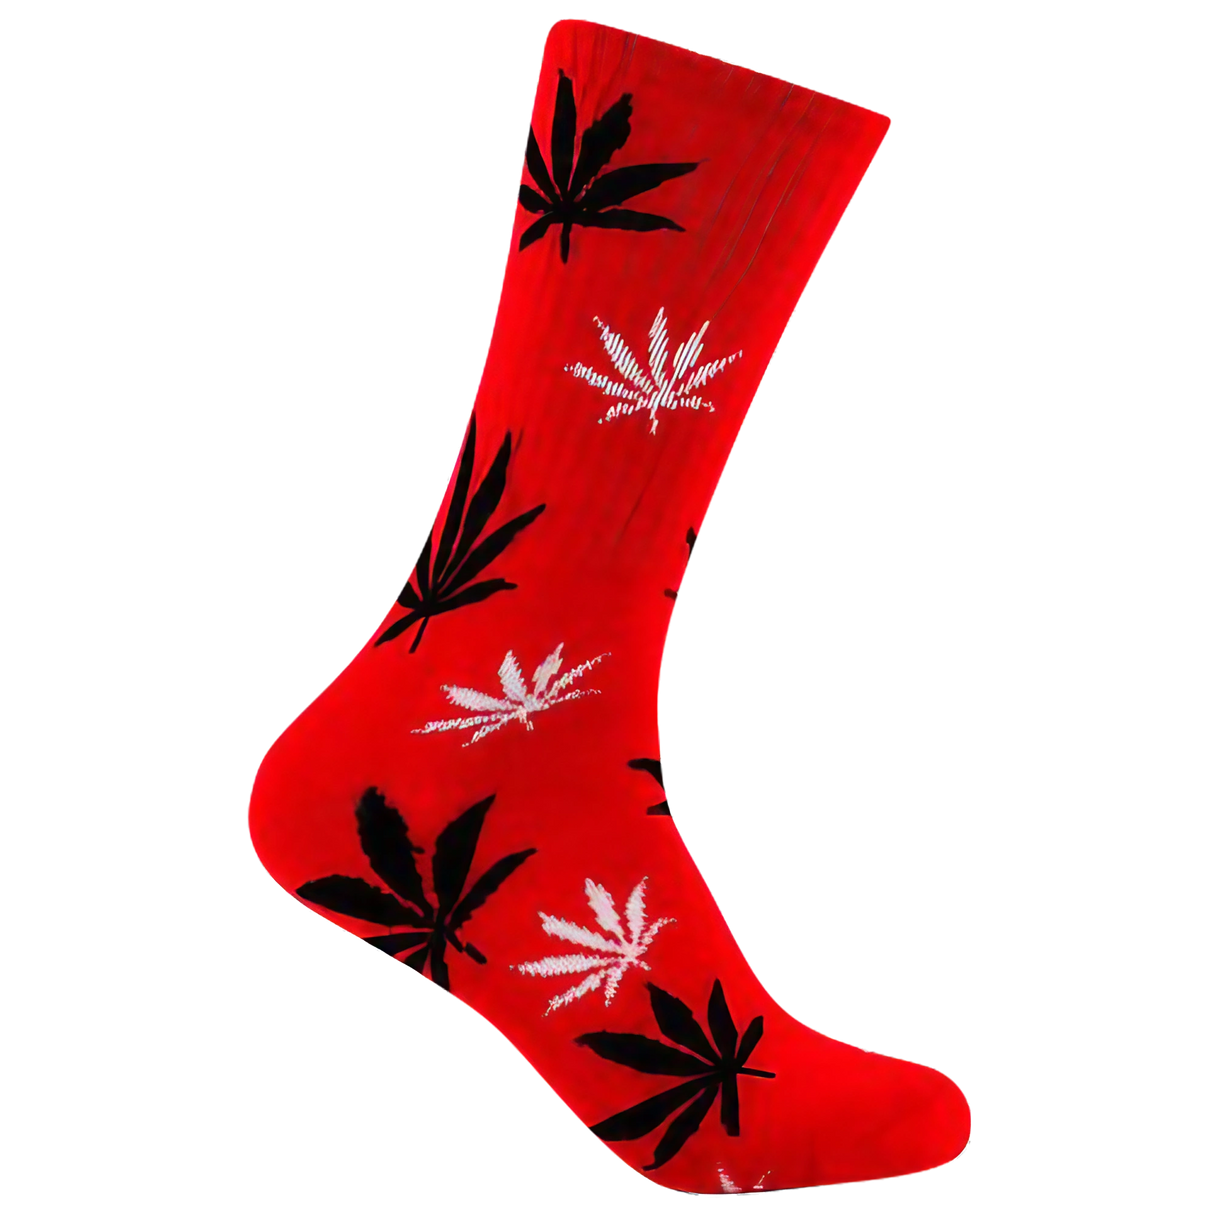 Mad Toro Socks in Red/Black with Cannabis Leaf Design, Comfortable Polyester-Spandex Blend